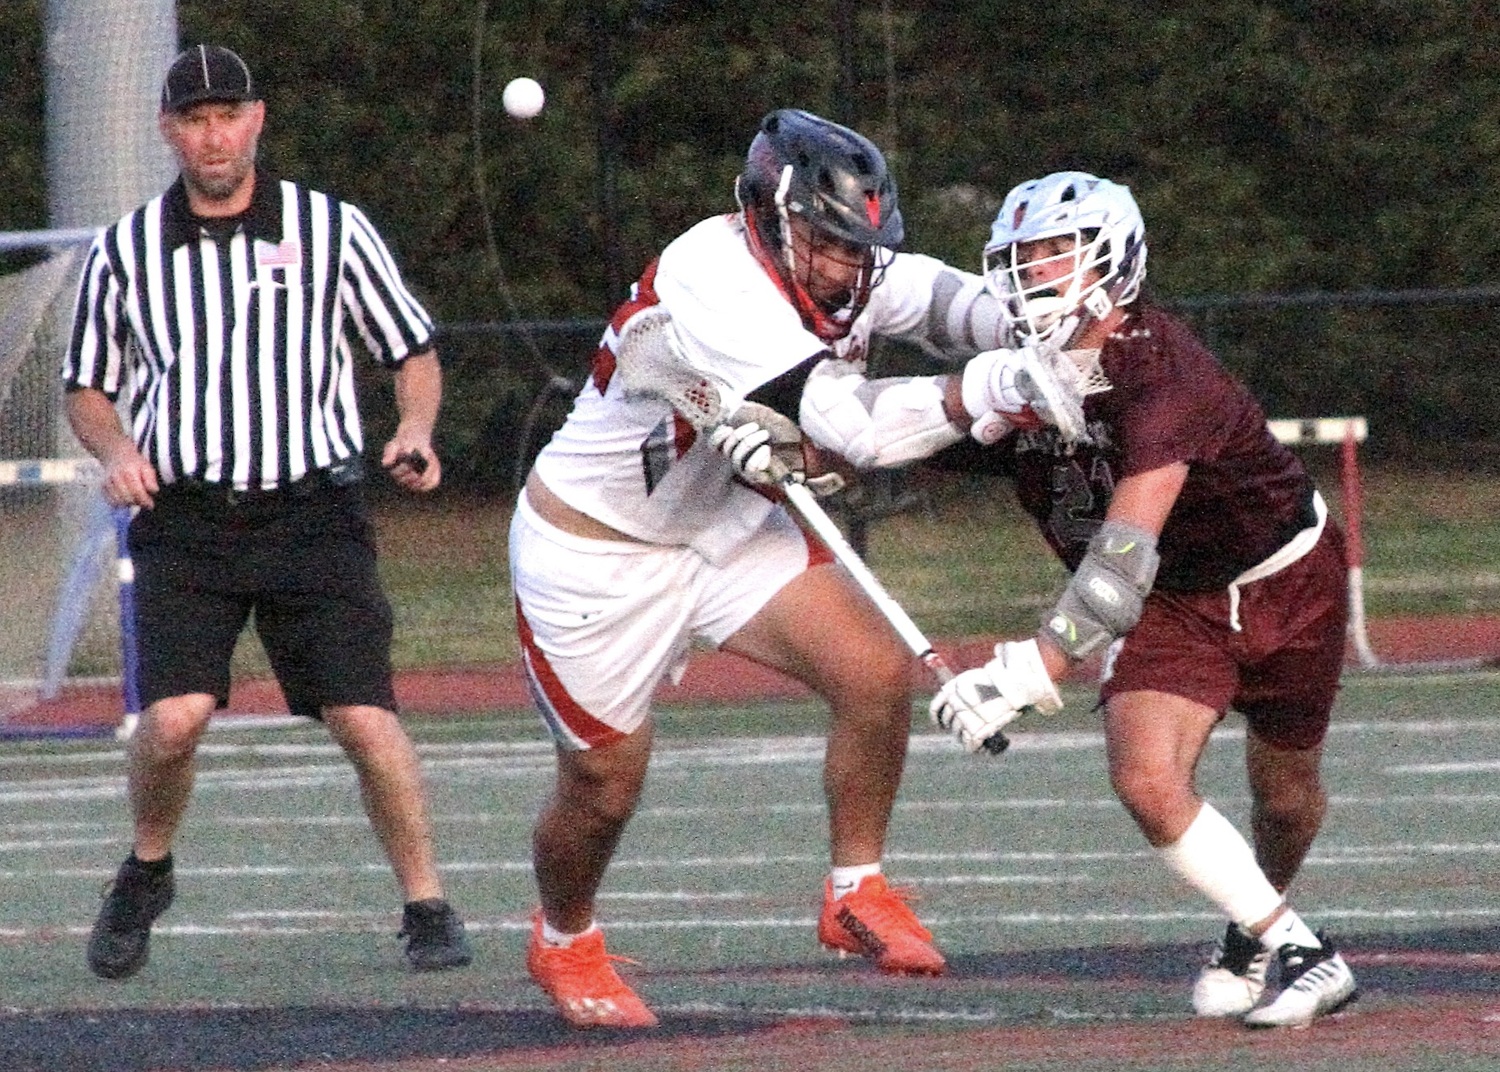 Junior midfielder Jack Cooper keeps his eyes on the ball while being checked off the faceoff. DESIRÉE KEEGAN